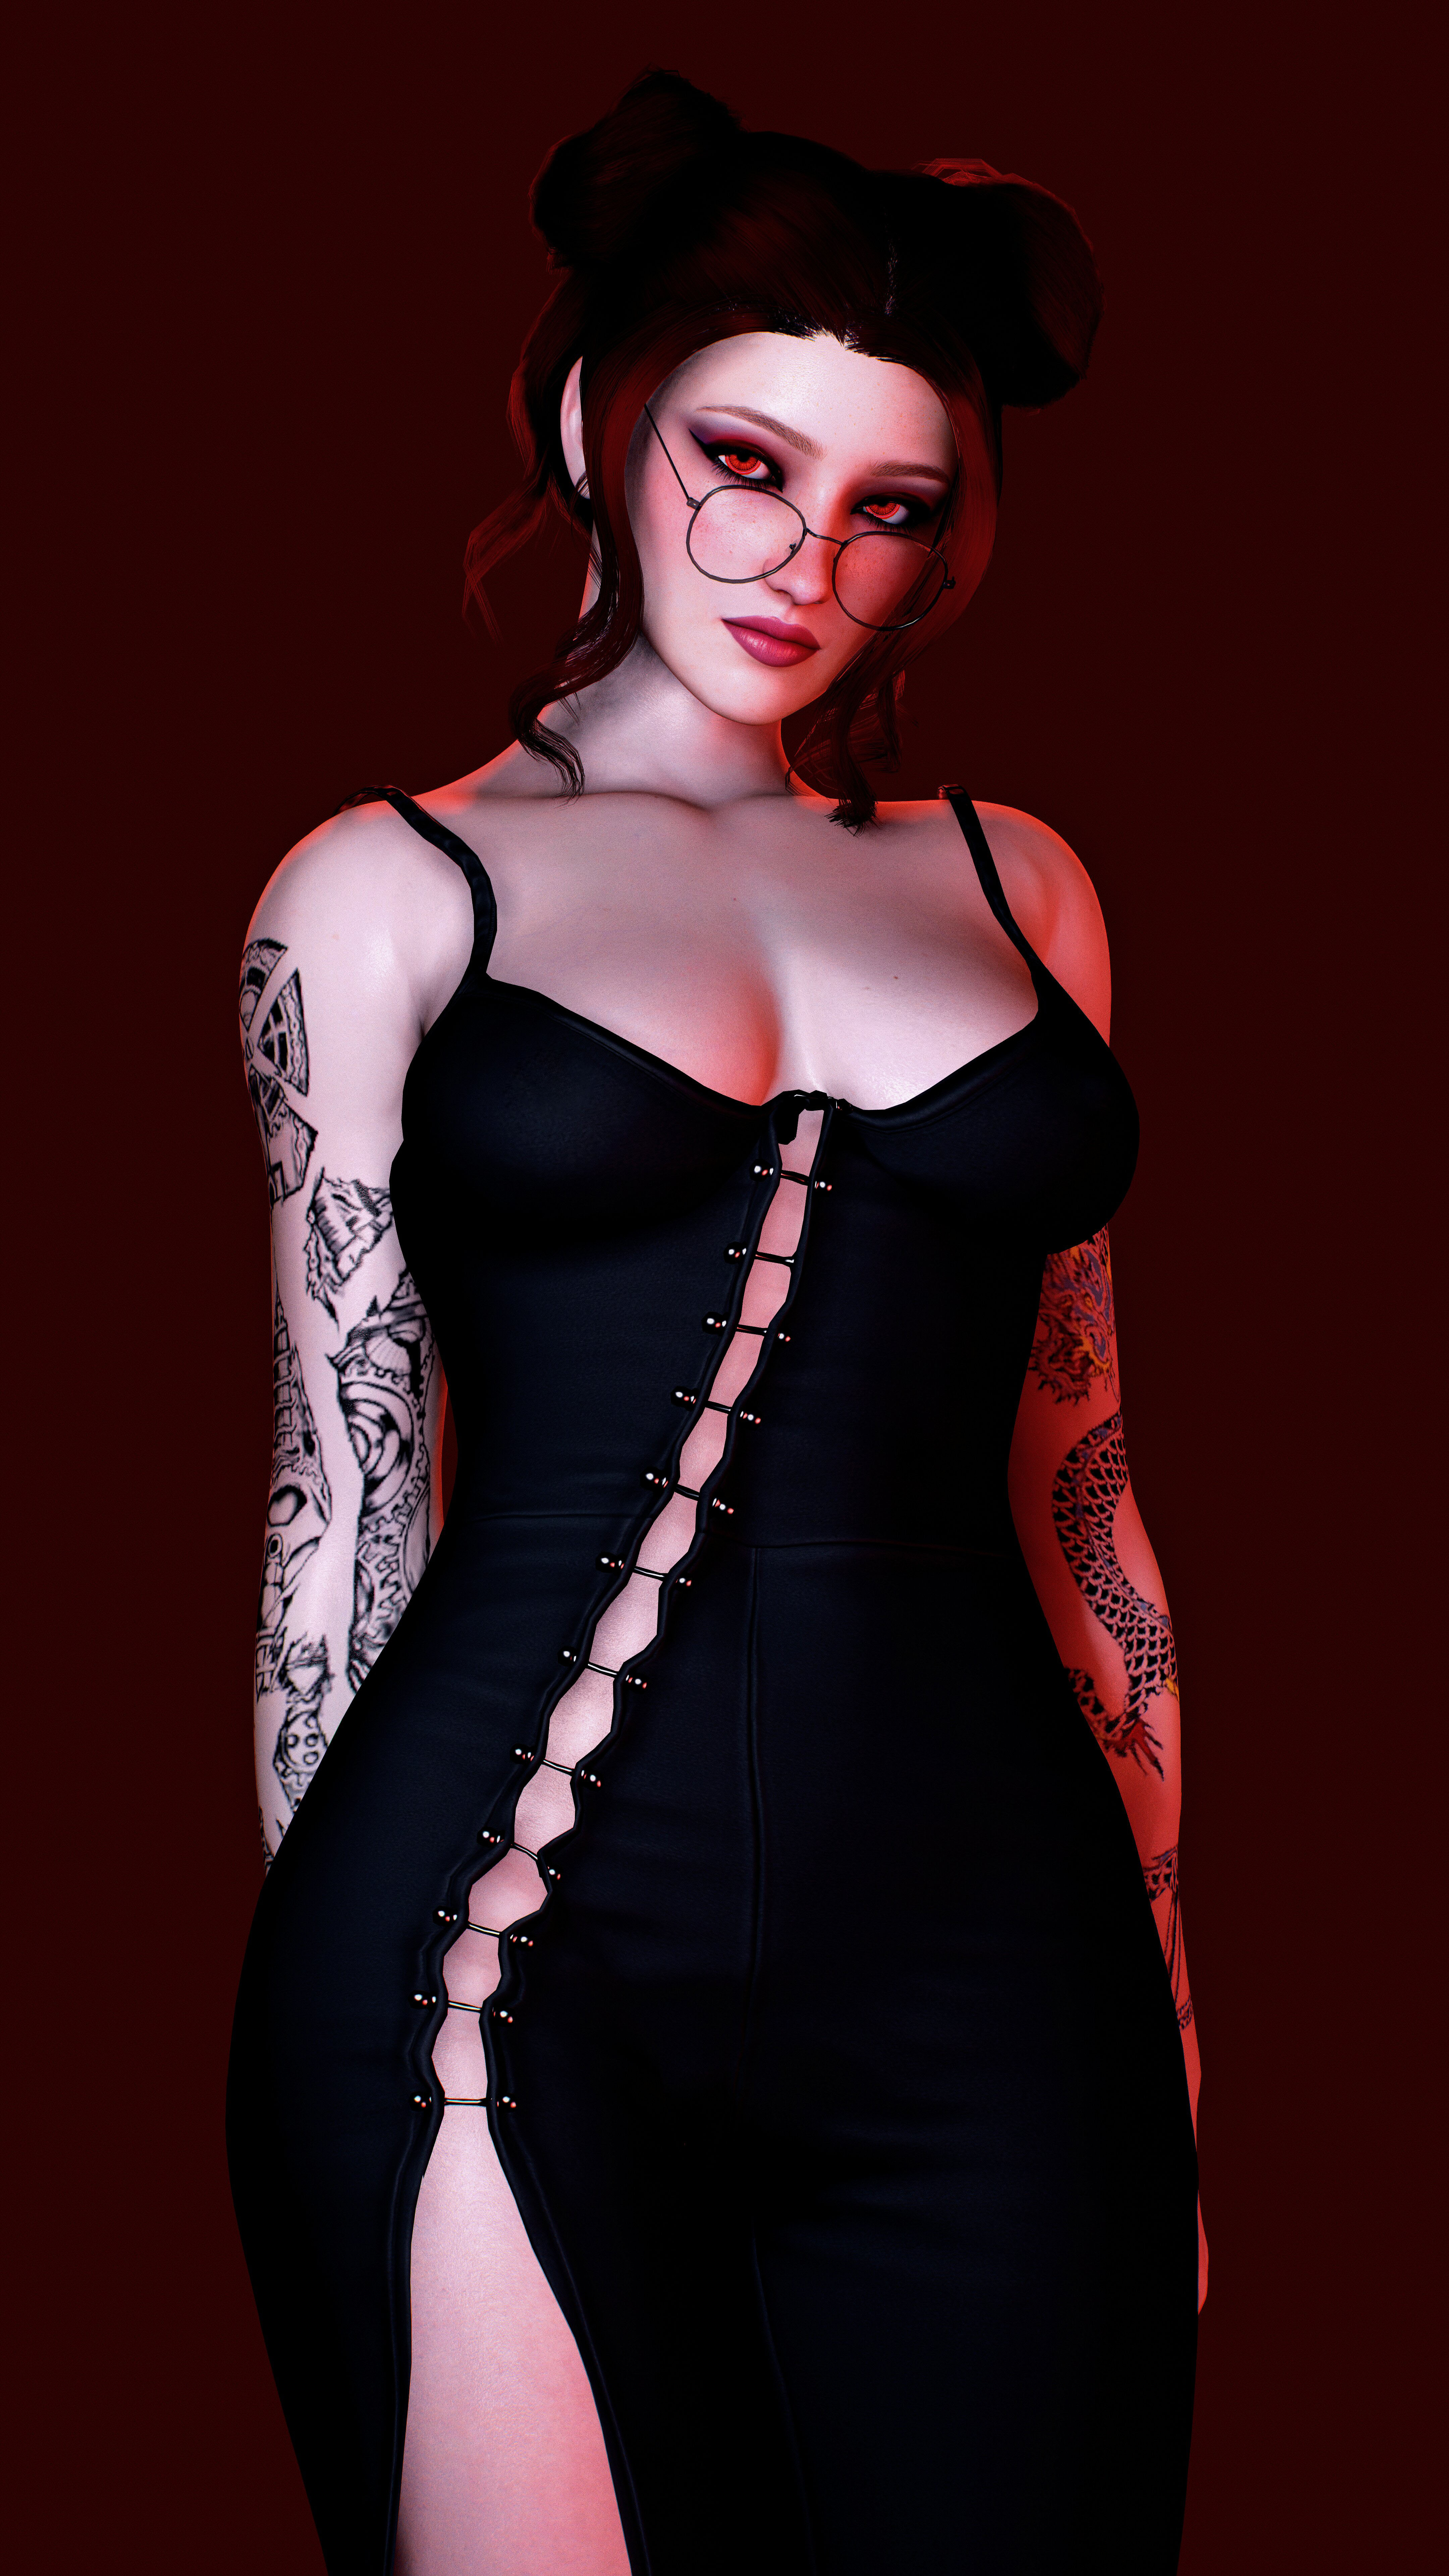 Mary Mushkin NoPixel Short Hair Red Eyes Black Dress Tattoo Women With Glasses Looking At Viewer Red 4320x7680